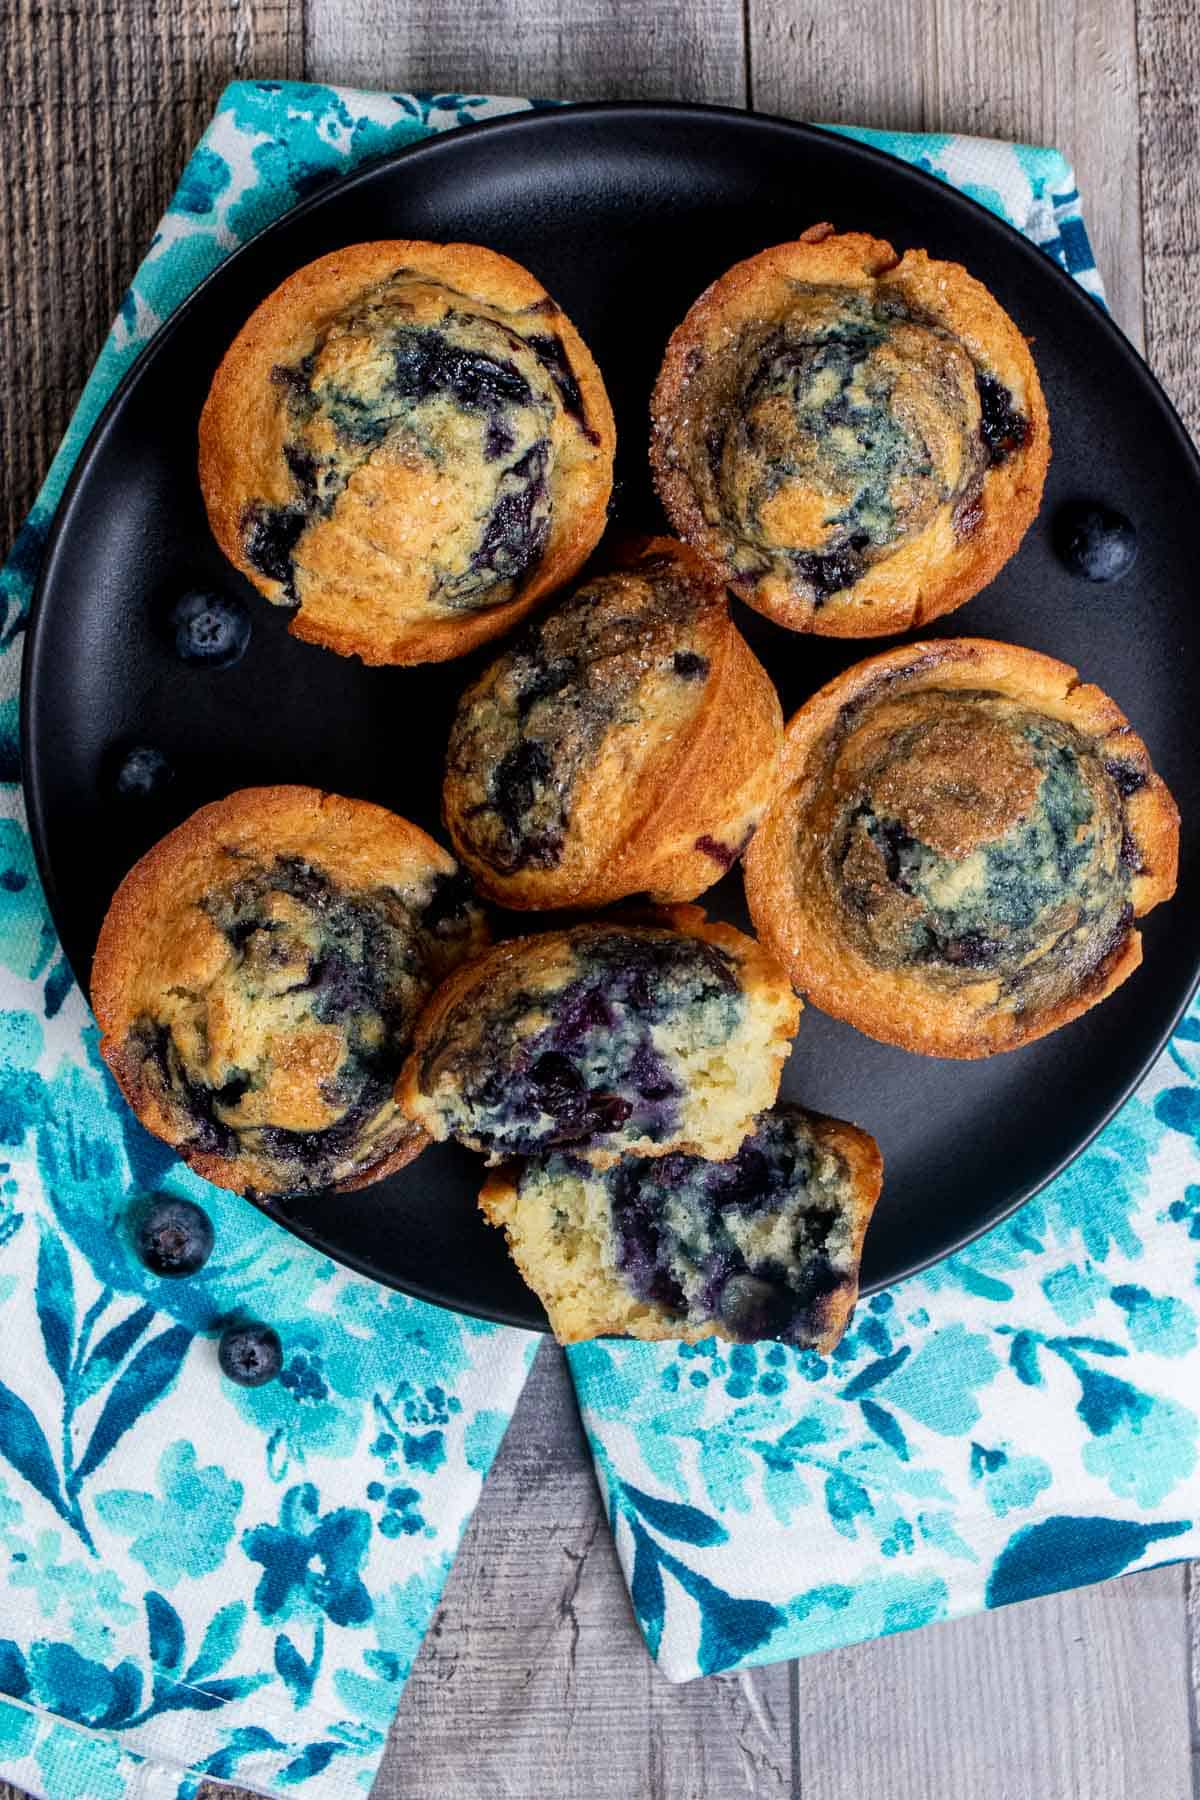 Overhead view of a black plate on a blue and white cloth with a pile of blueberry swirl muffins on top.